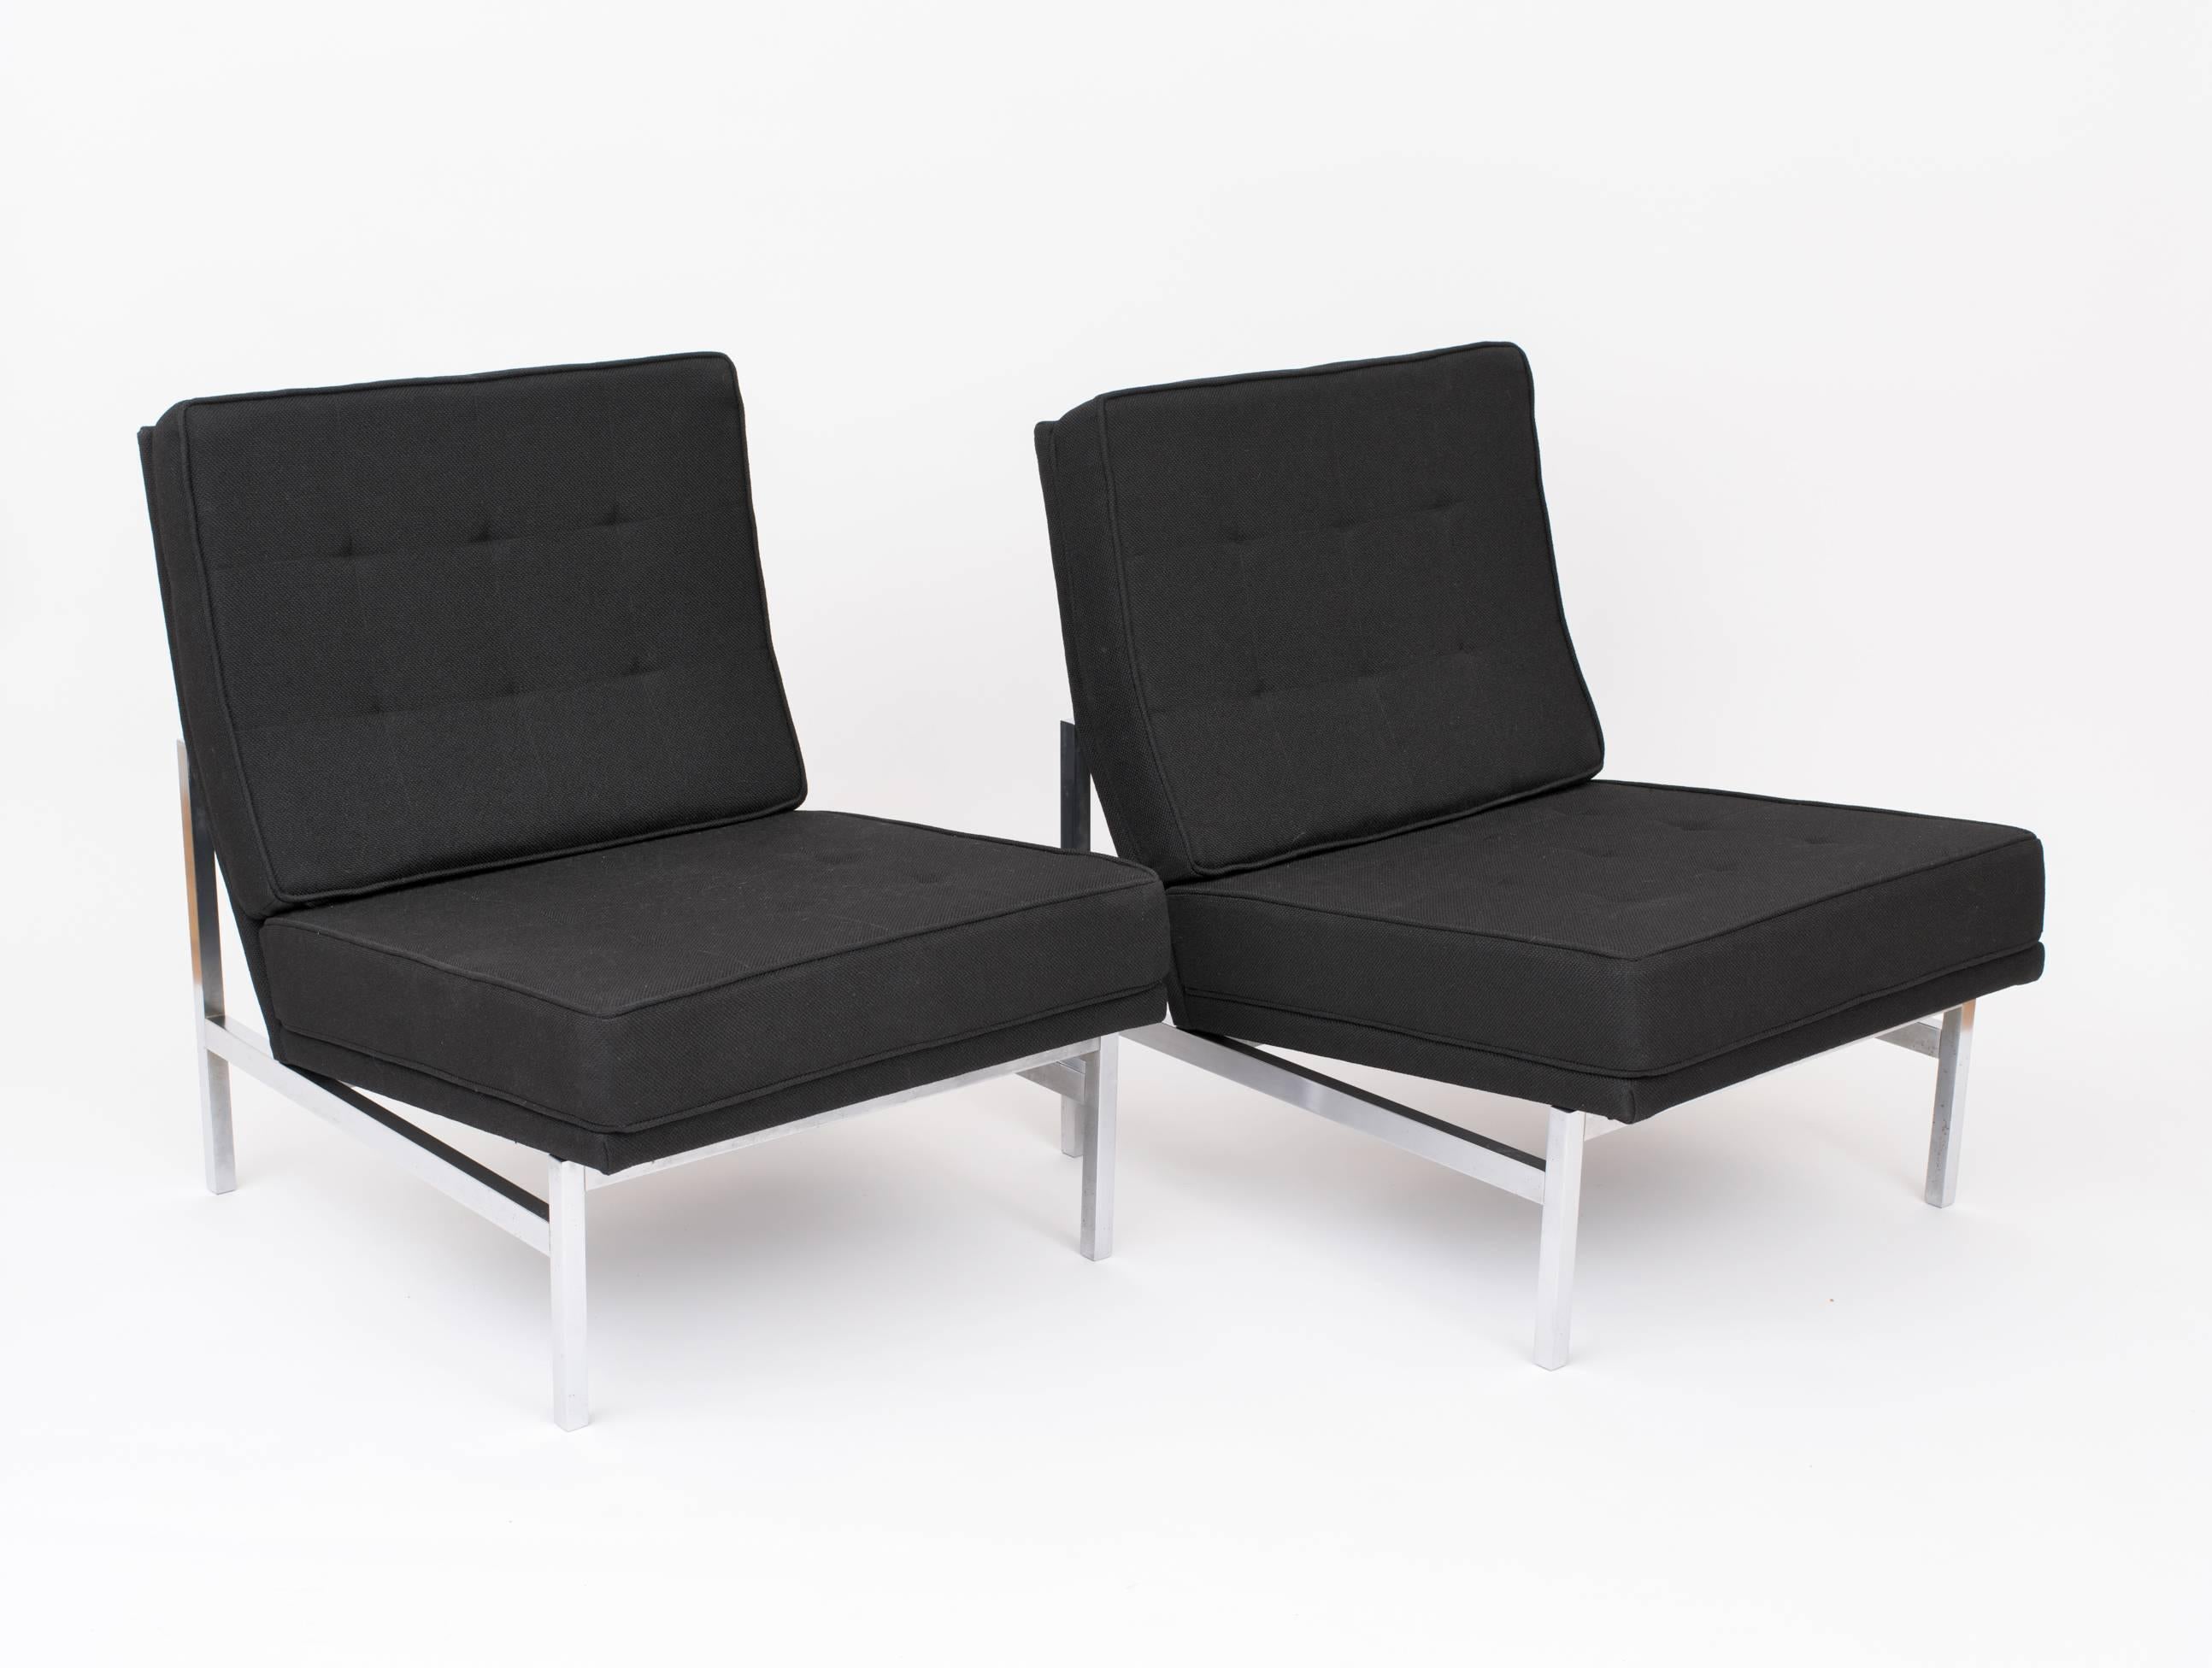 A pair of Florence Knoll model 2551 lounge chairs with square, brushed steel frames that support a pitched, floating seat, featuring brand new, black wool fabric and upholstered as originally designed. We saved the original tags and they are